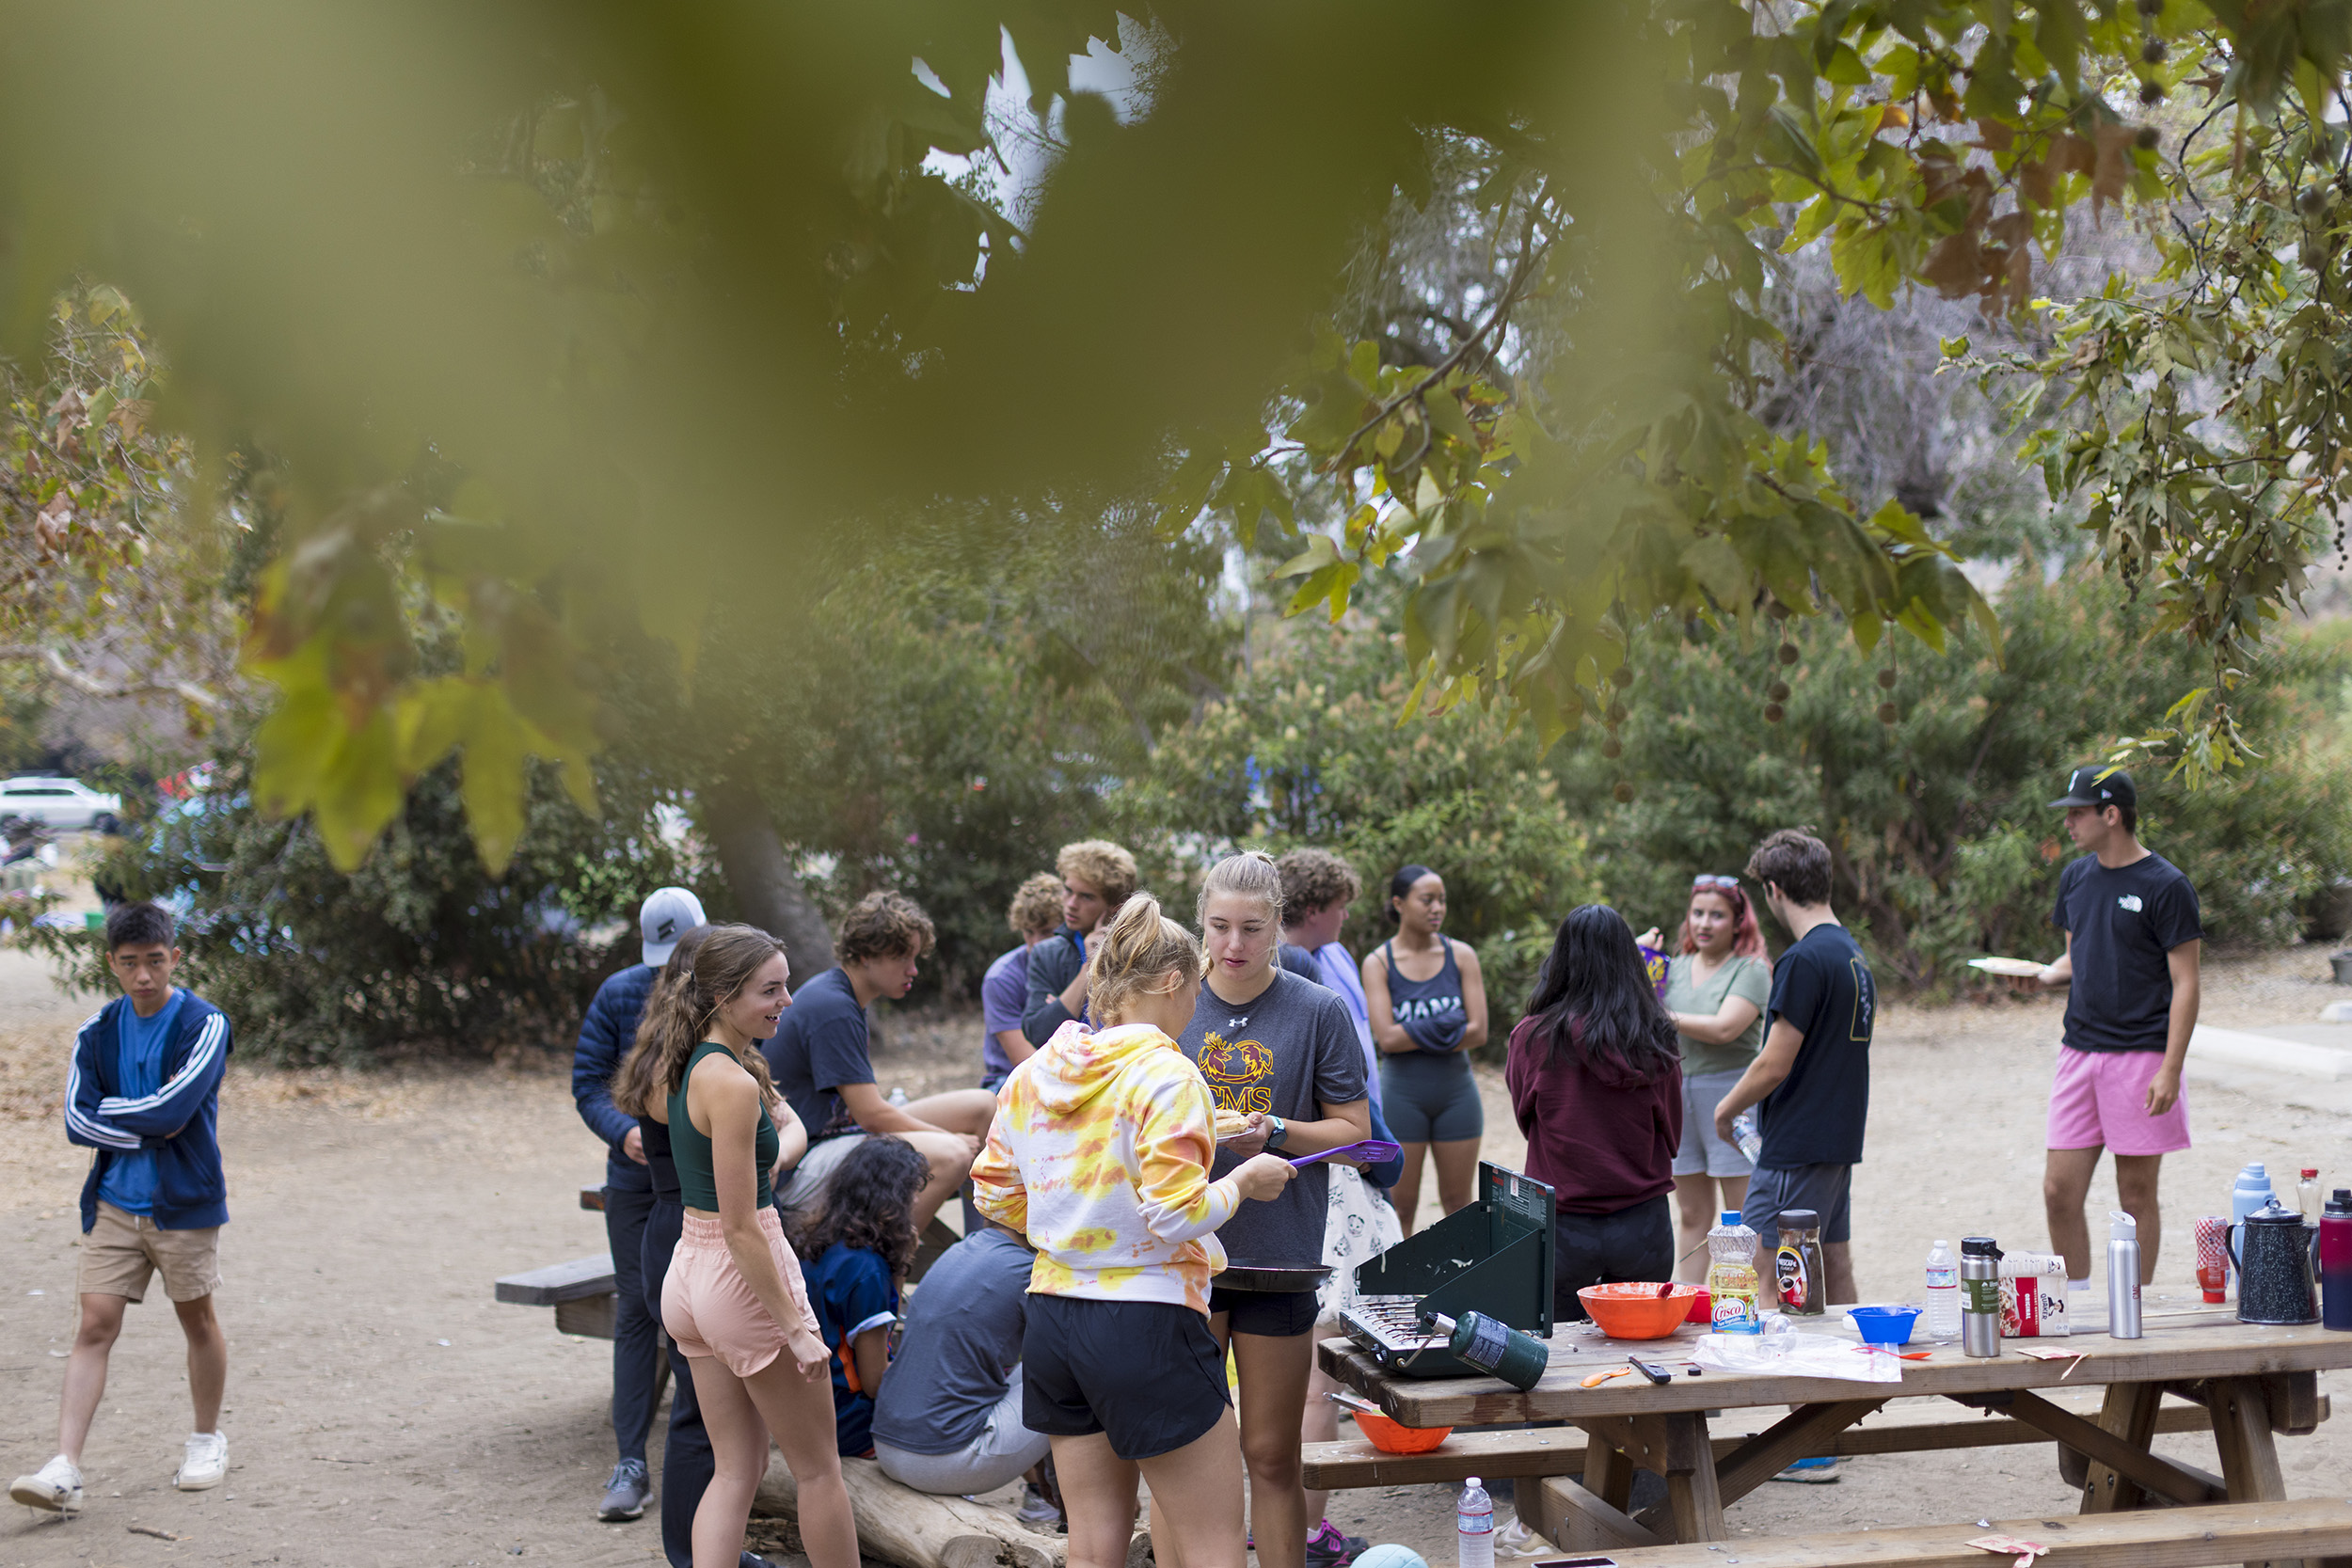 Students mingle around picnic tables set up with a portable grill and breakfast items.